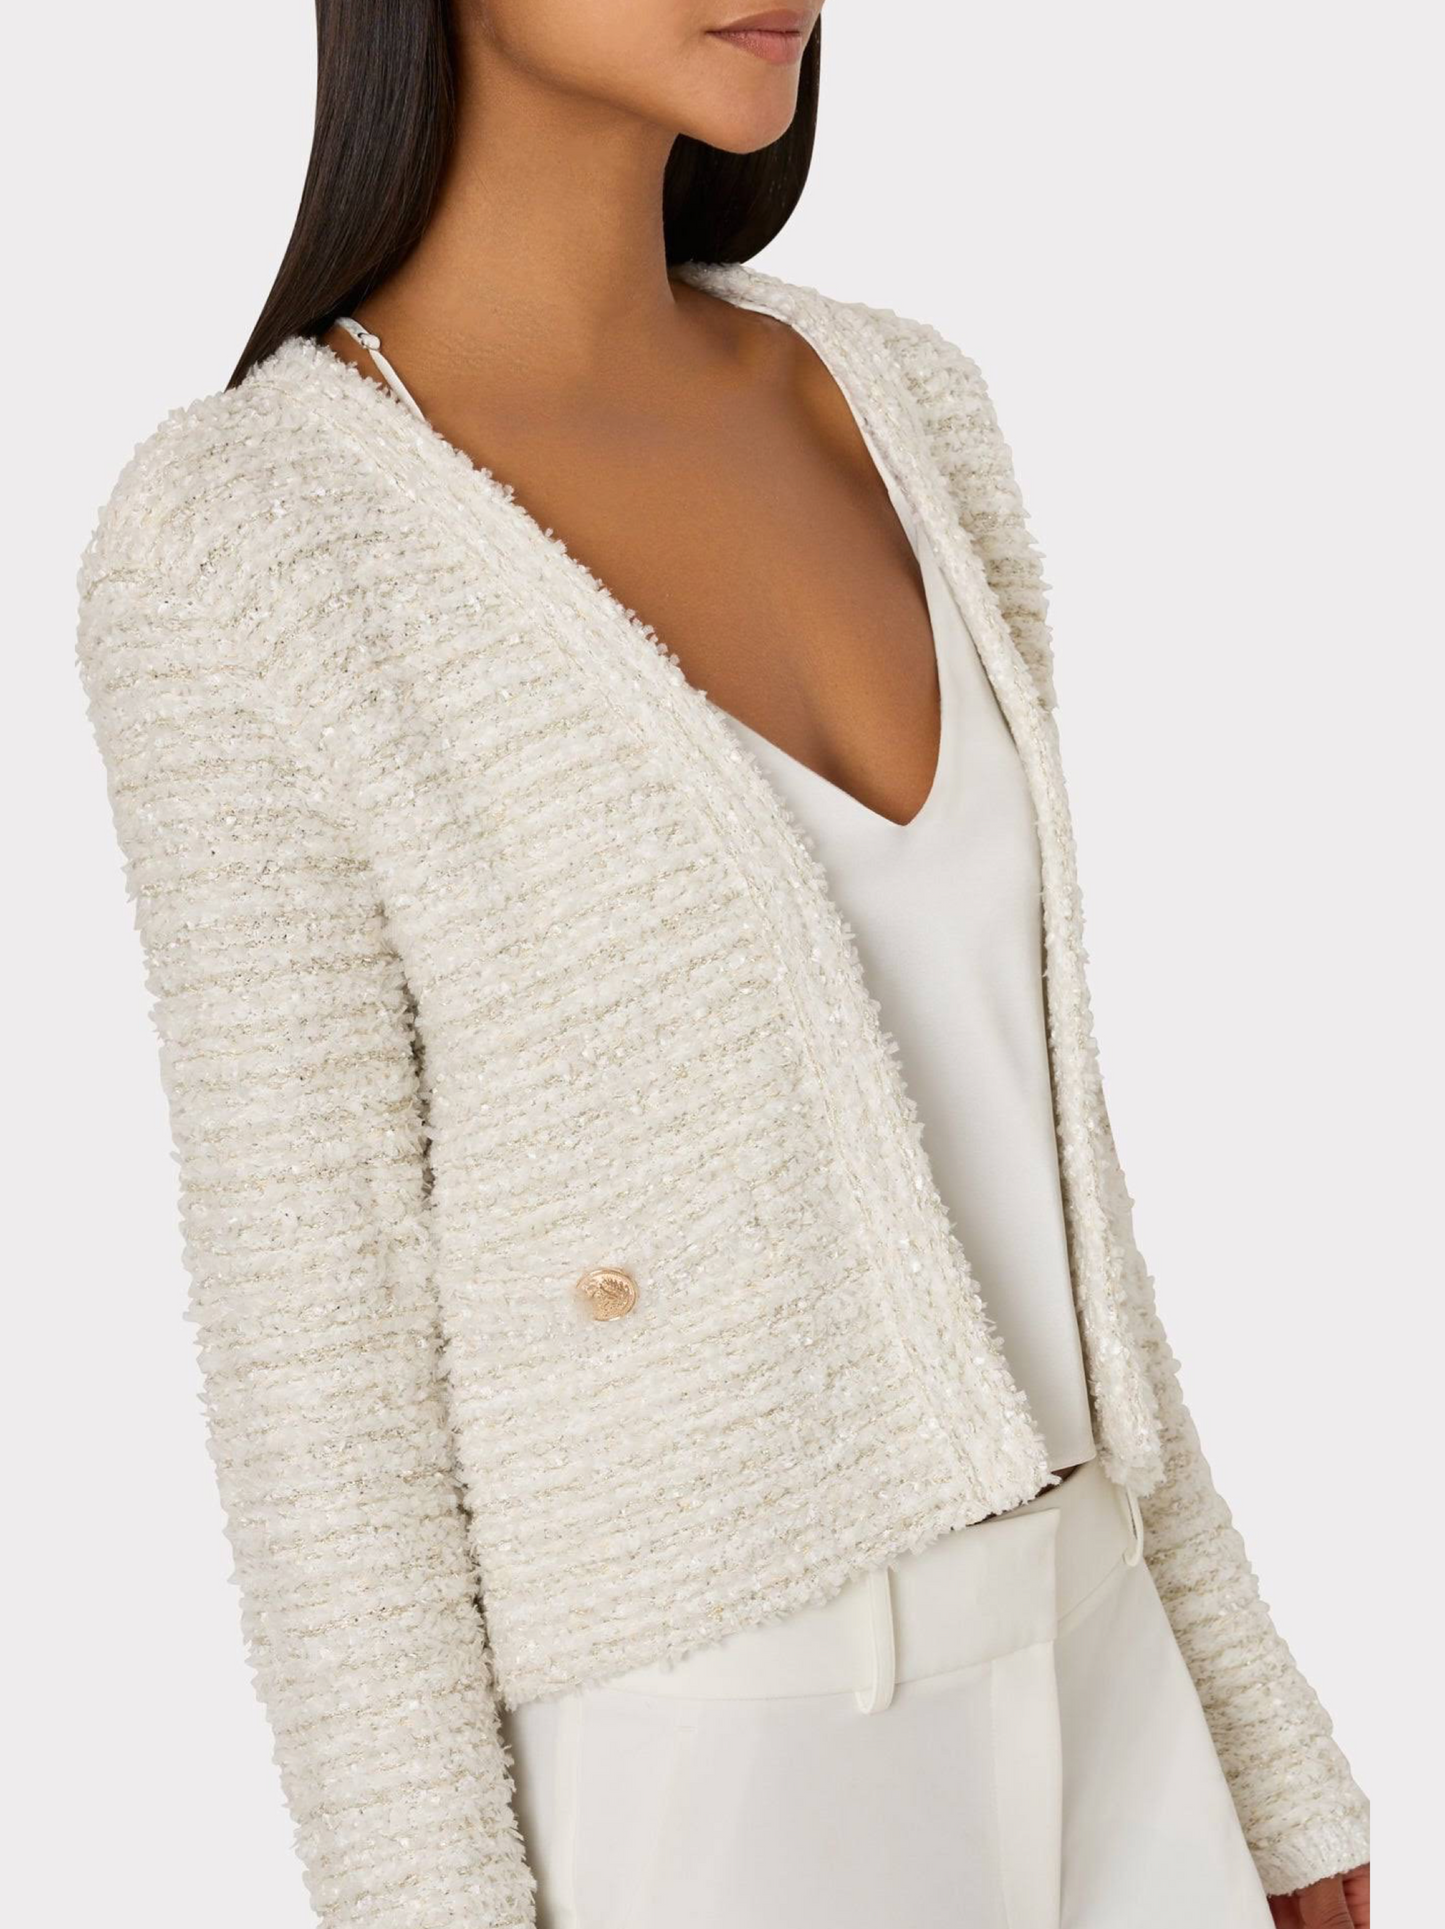 Milly Knit Textured Boucle Cardigan Jacket in Ecru Multi